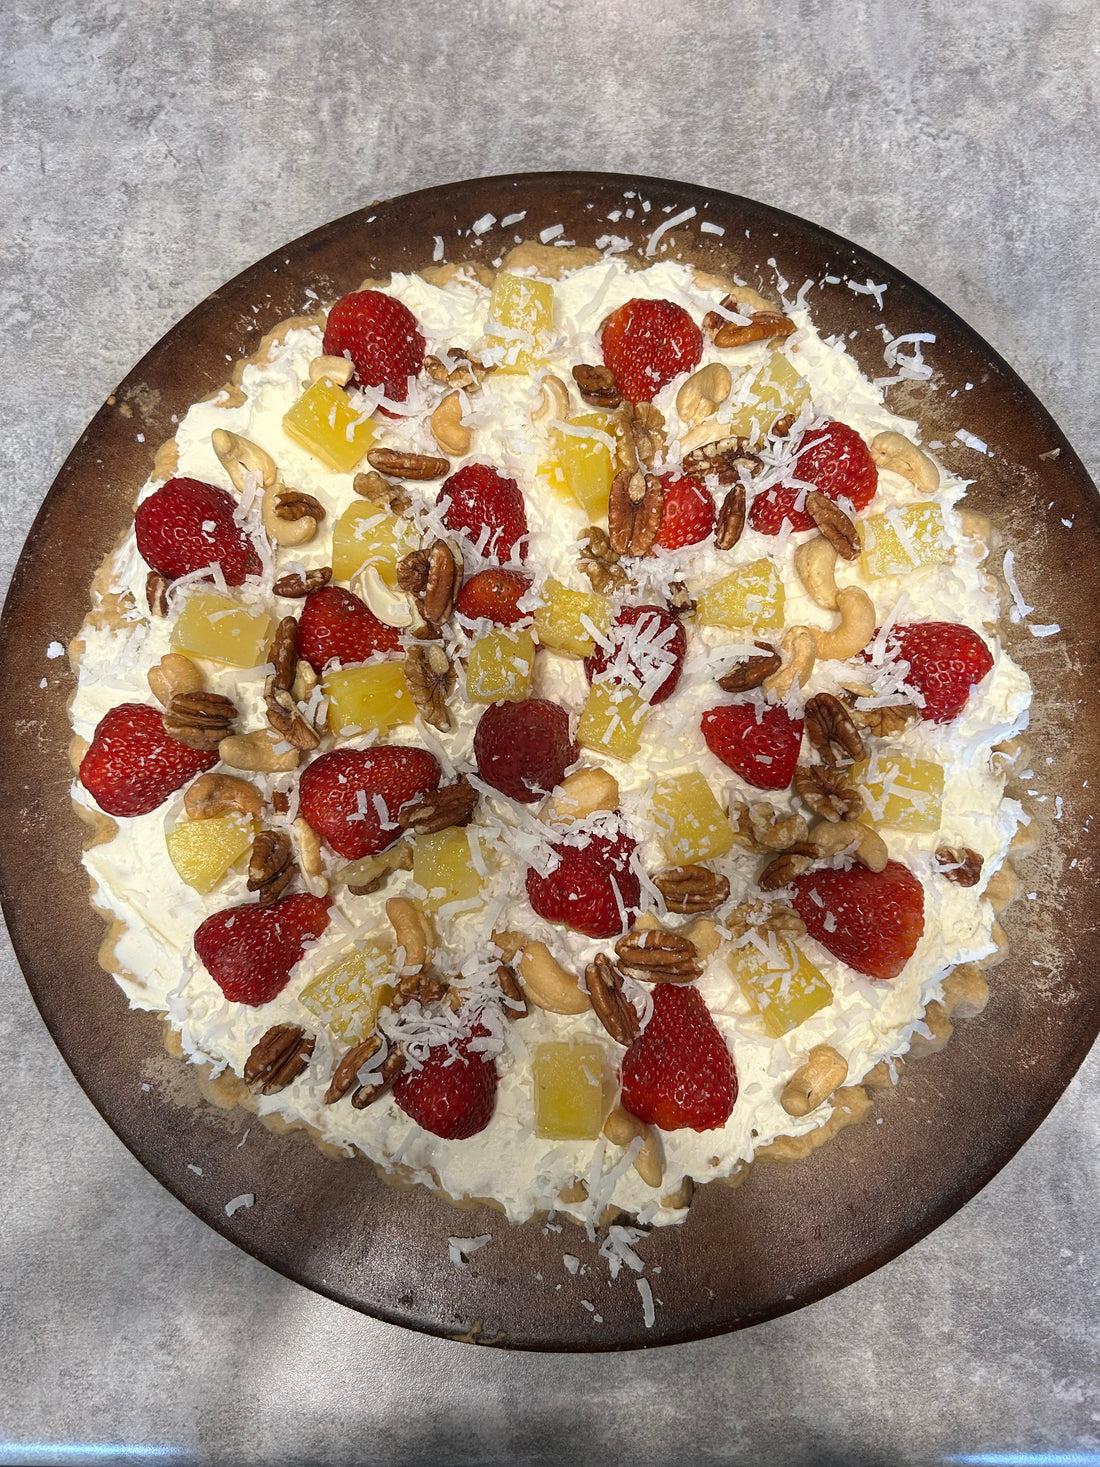 Maple Syrup-infused Cream Cheese Pizza Tart topped with Seasonal Fruits and Nuts